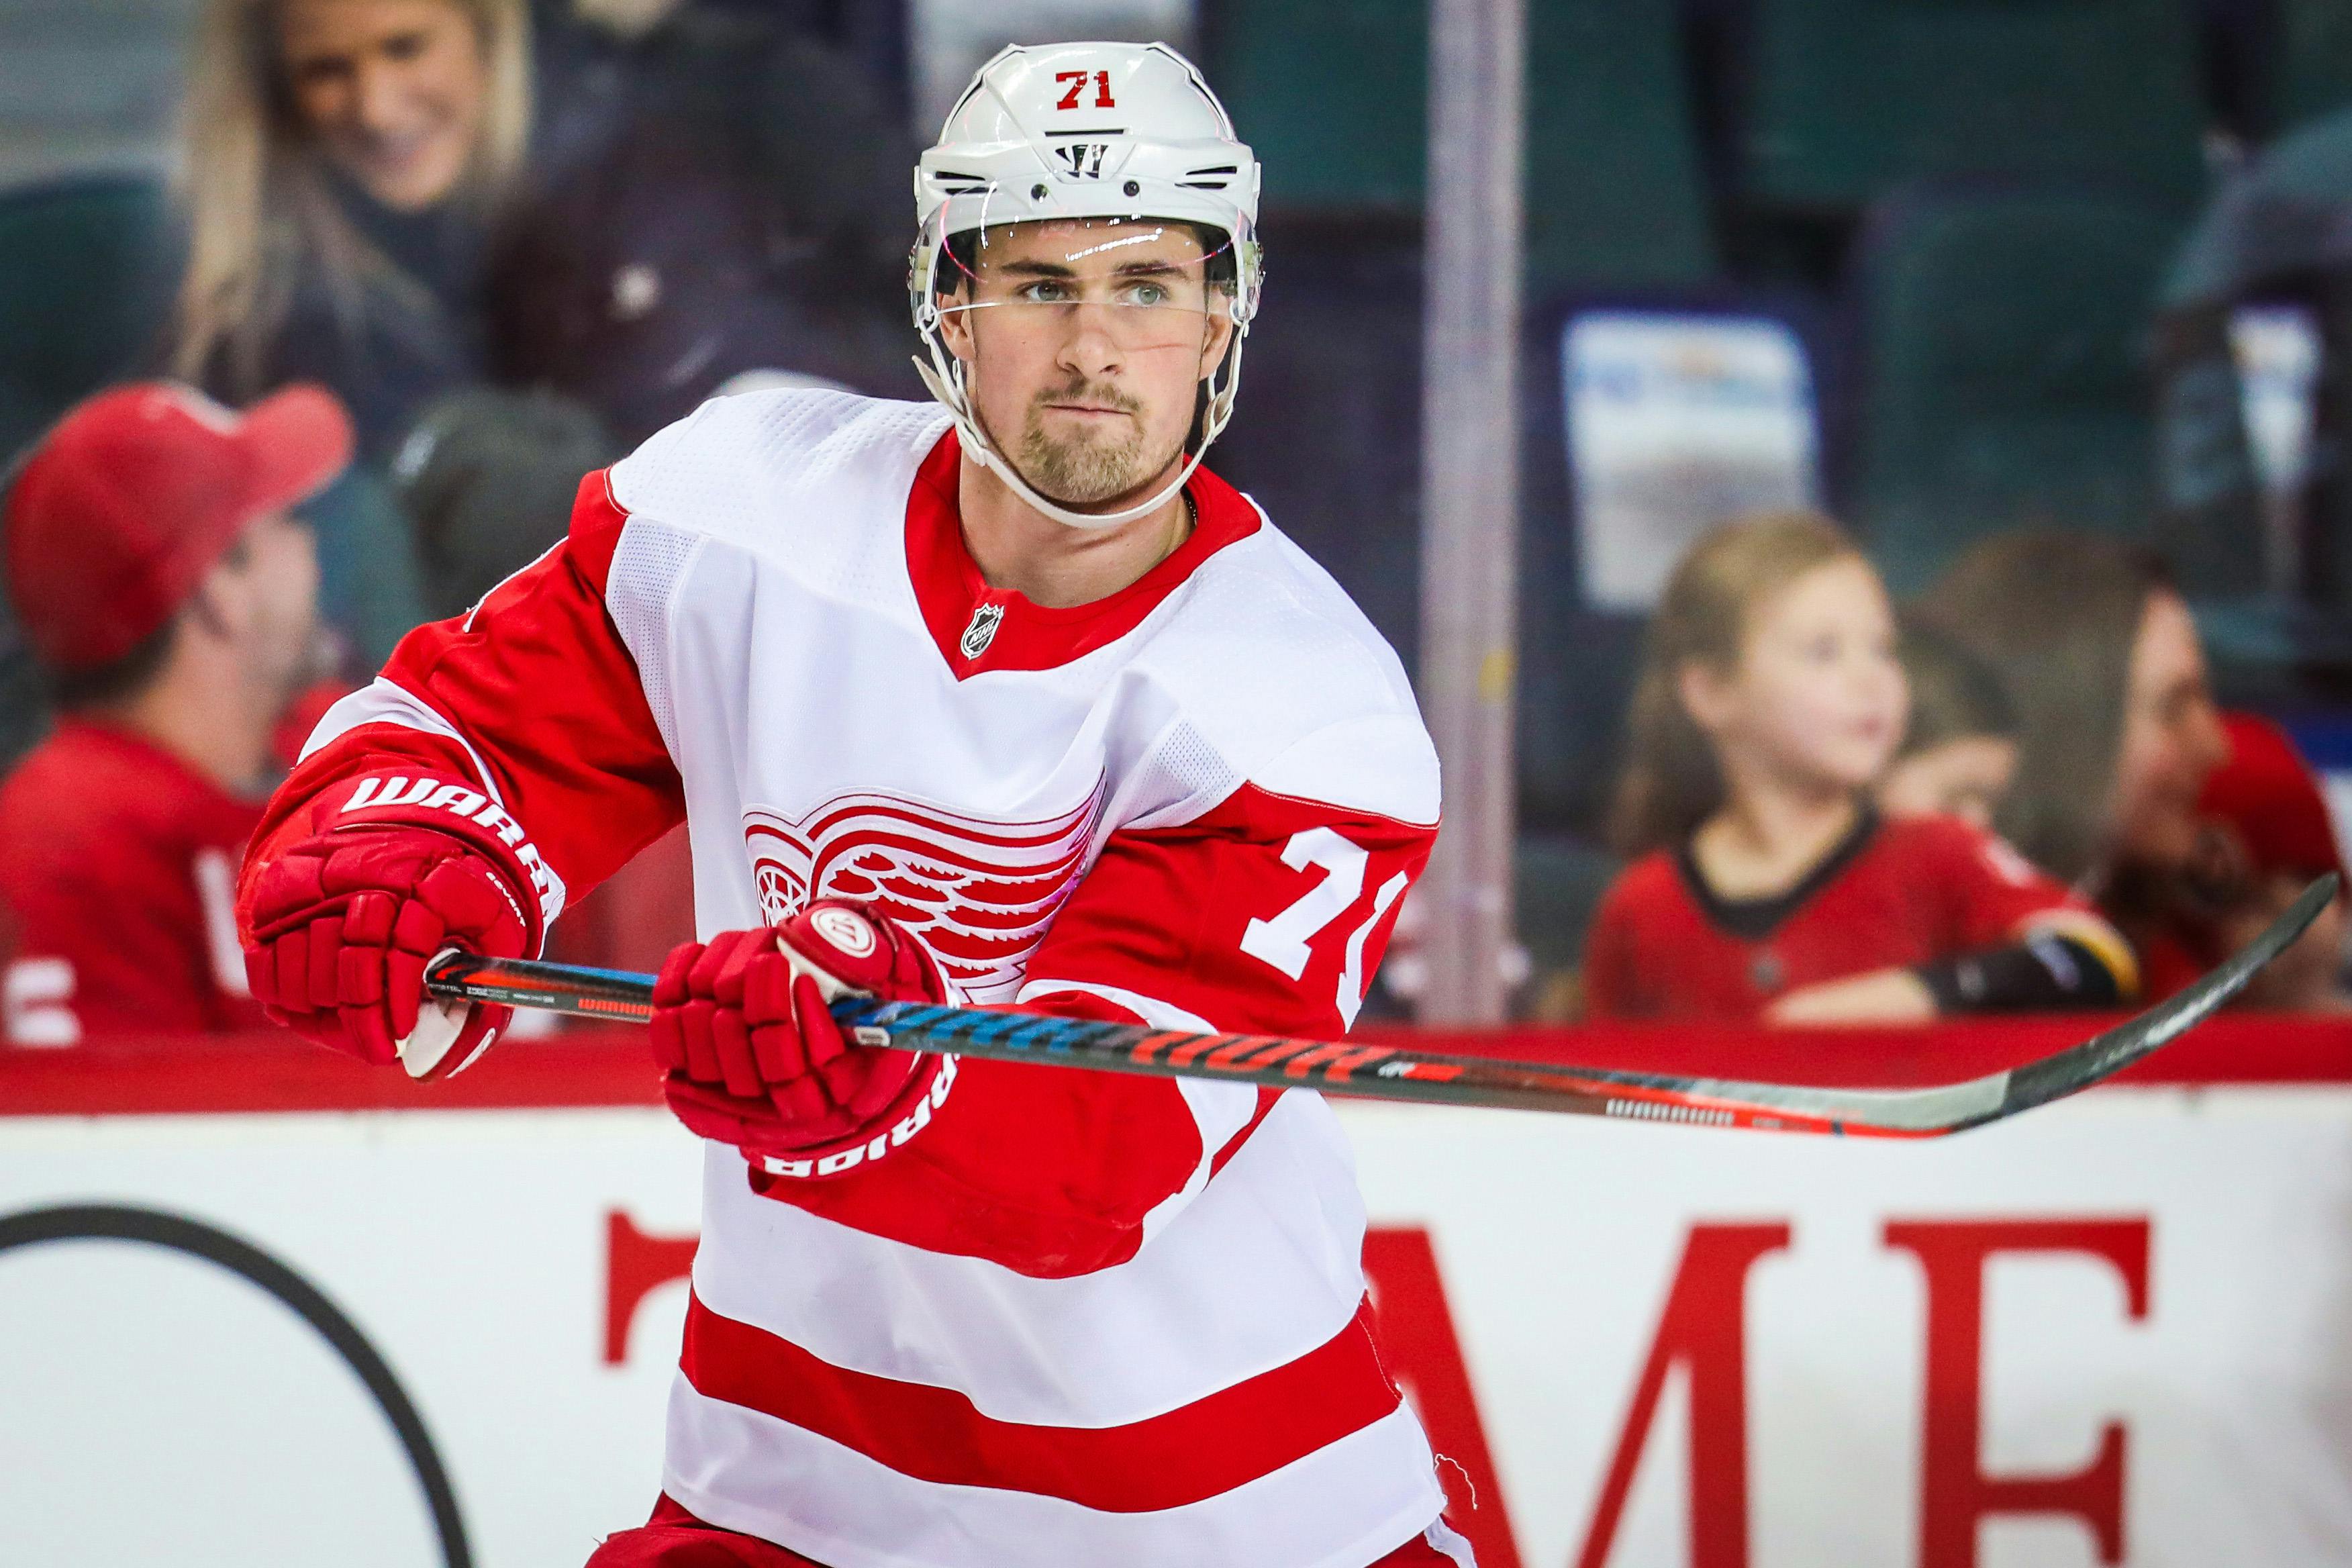 The day after Red Wings captain Dylan Larkin signed an 8-year